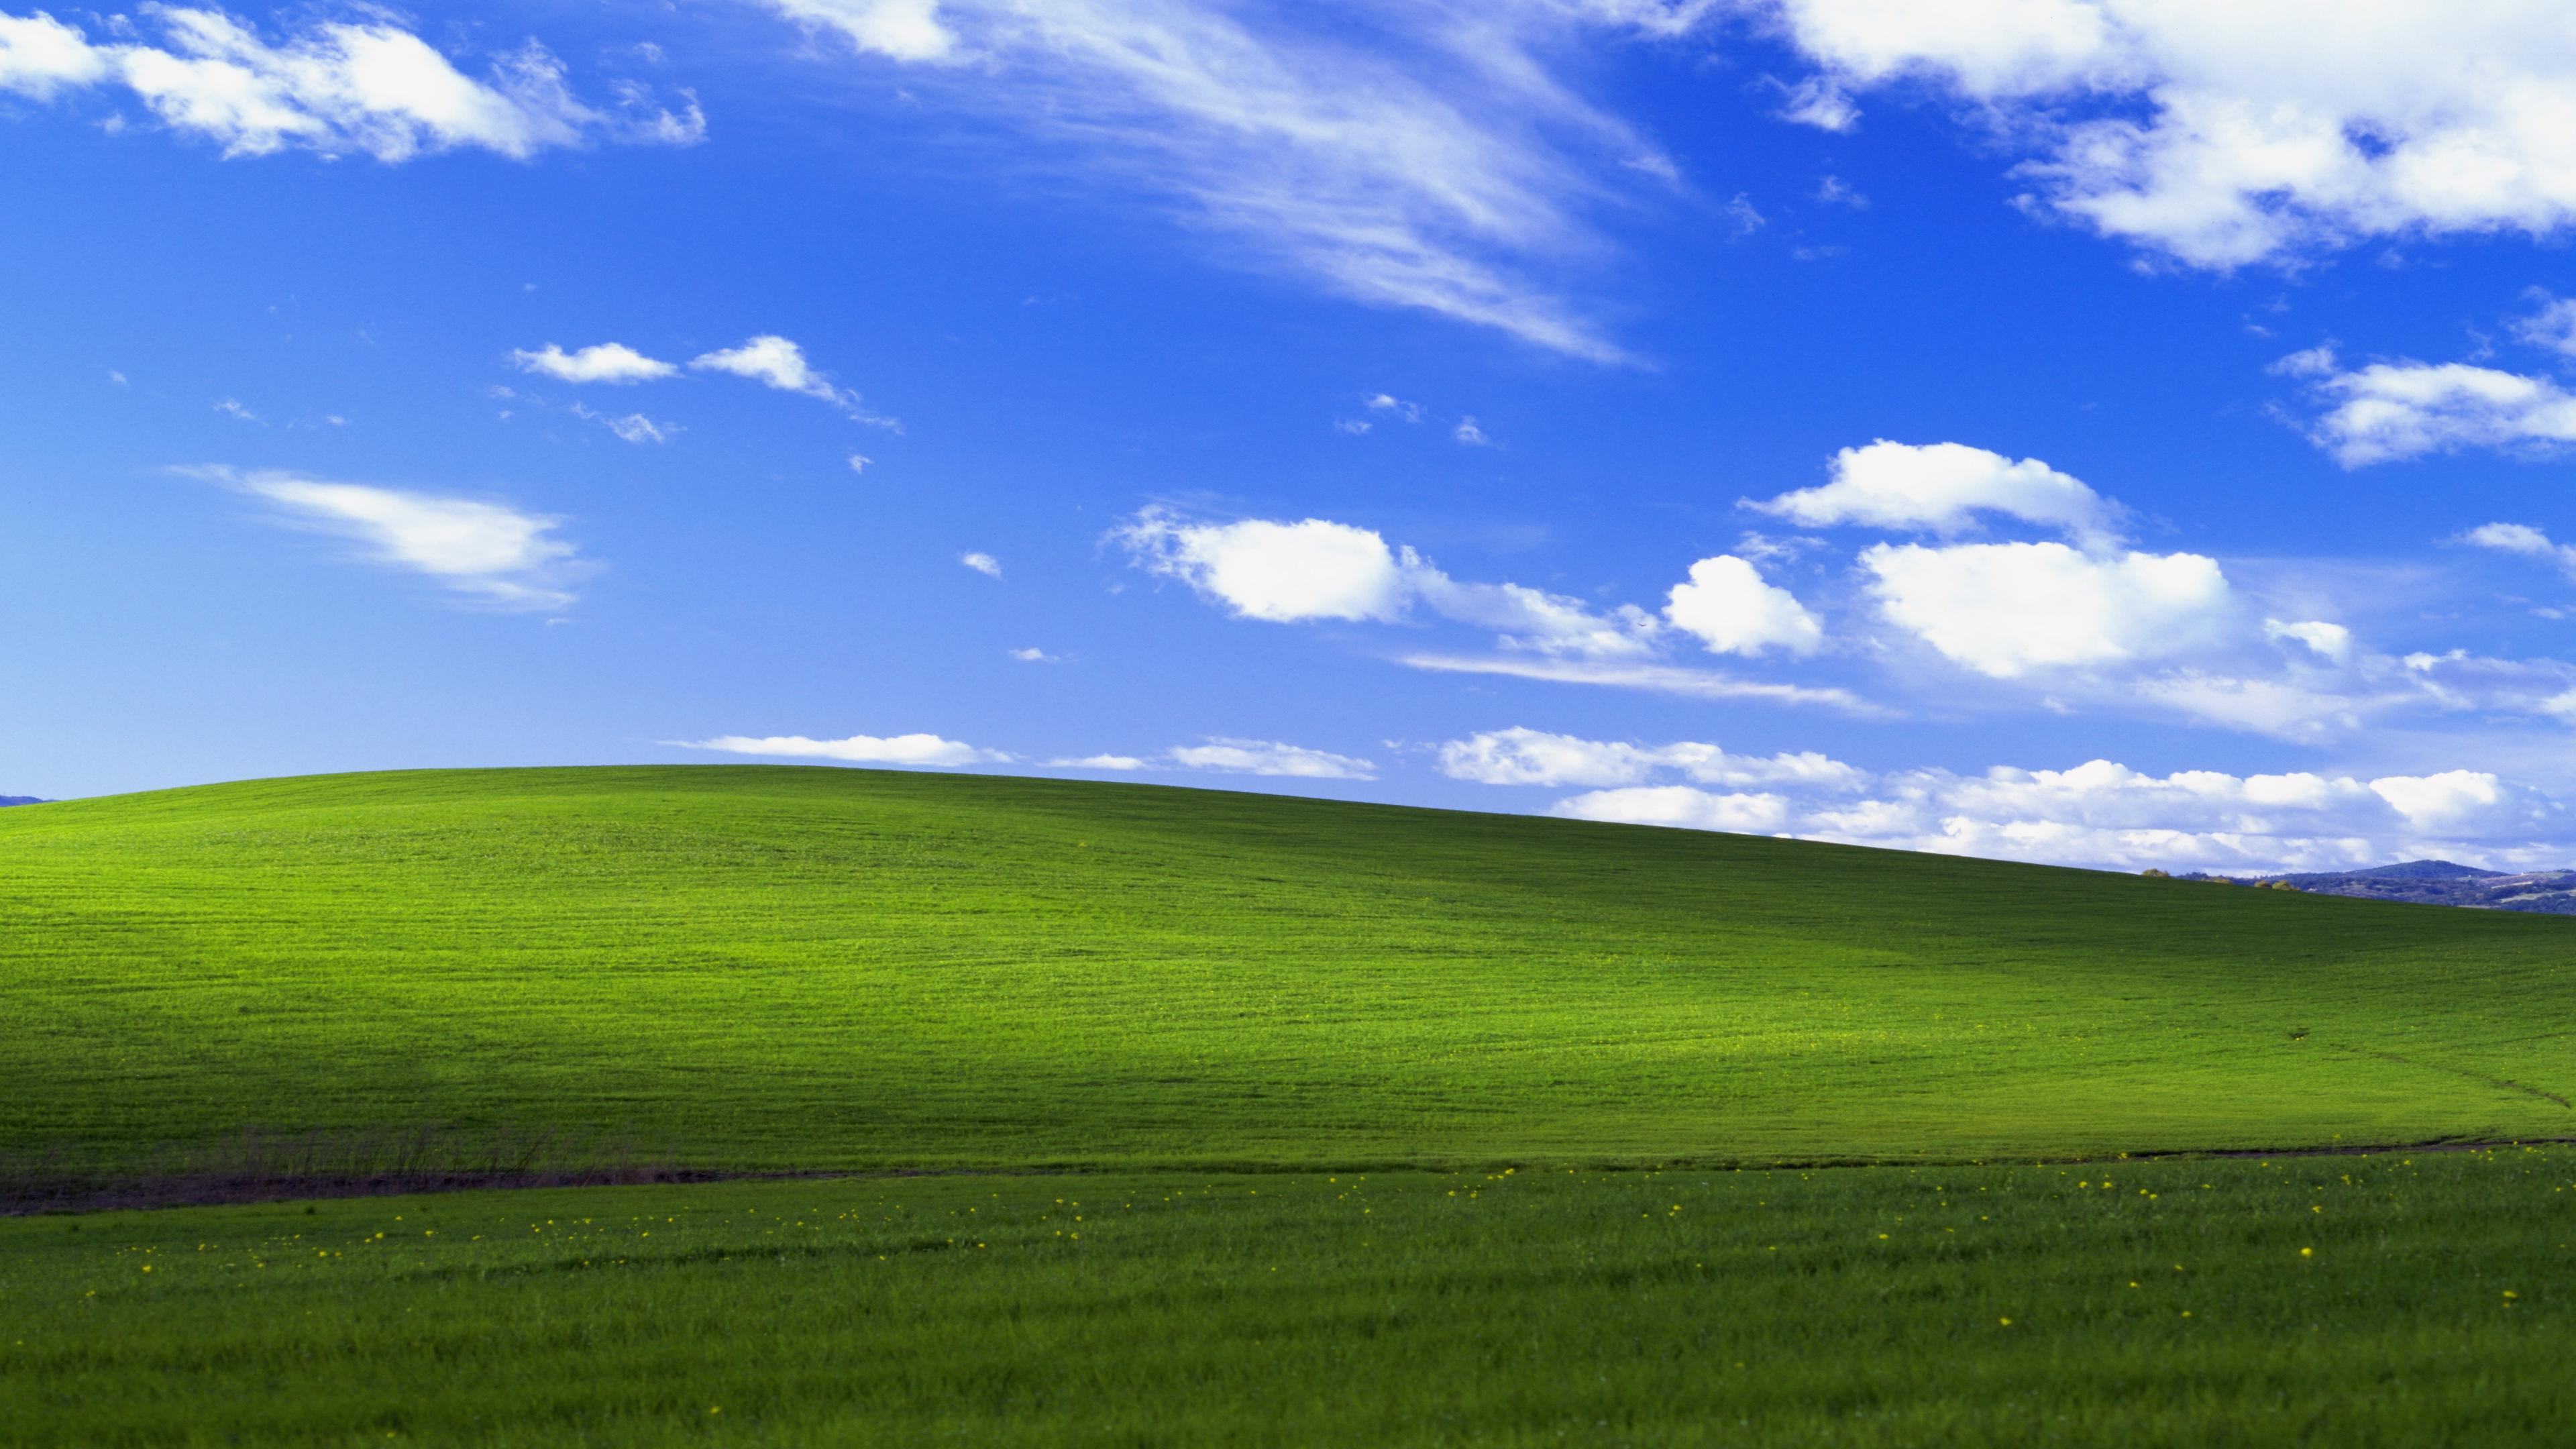 3840x2160 does someone has a 2560x1080 wallpaper of the old Windows XP landscape wallpaper? : r/ultrawidemasterrace